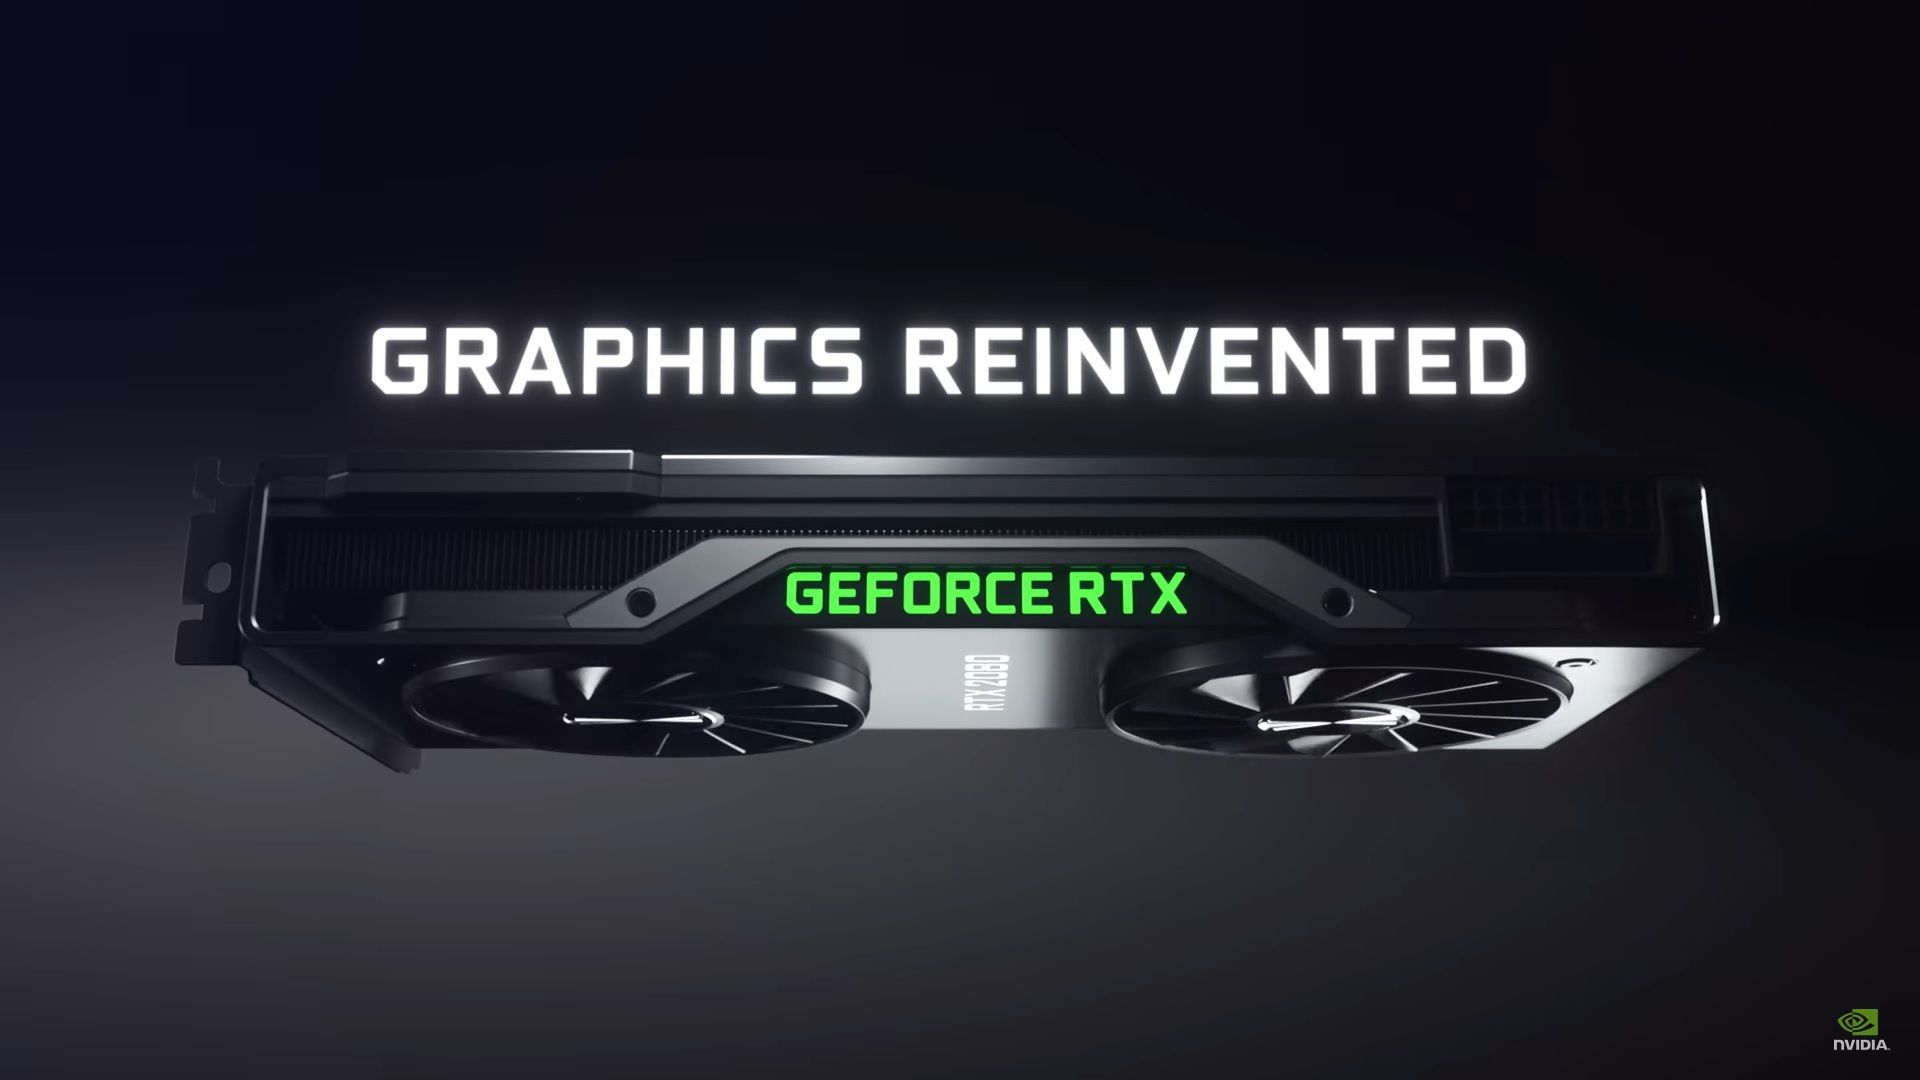 Nvidia RTX 2080Ti and 2070: meet the powerful new next generation GeForce RTX hardware